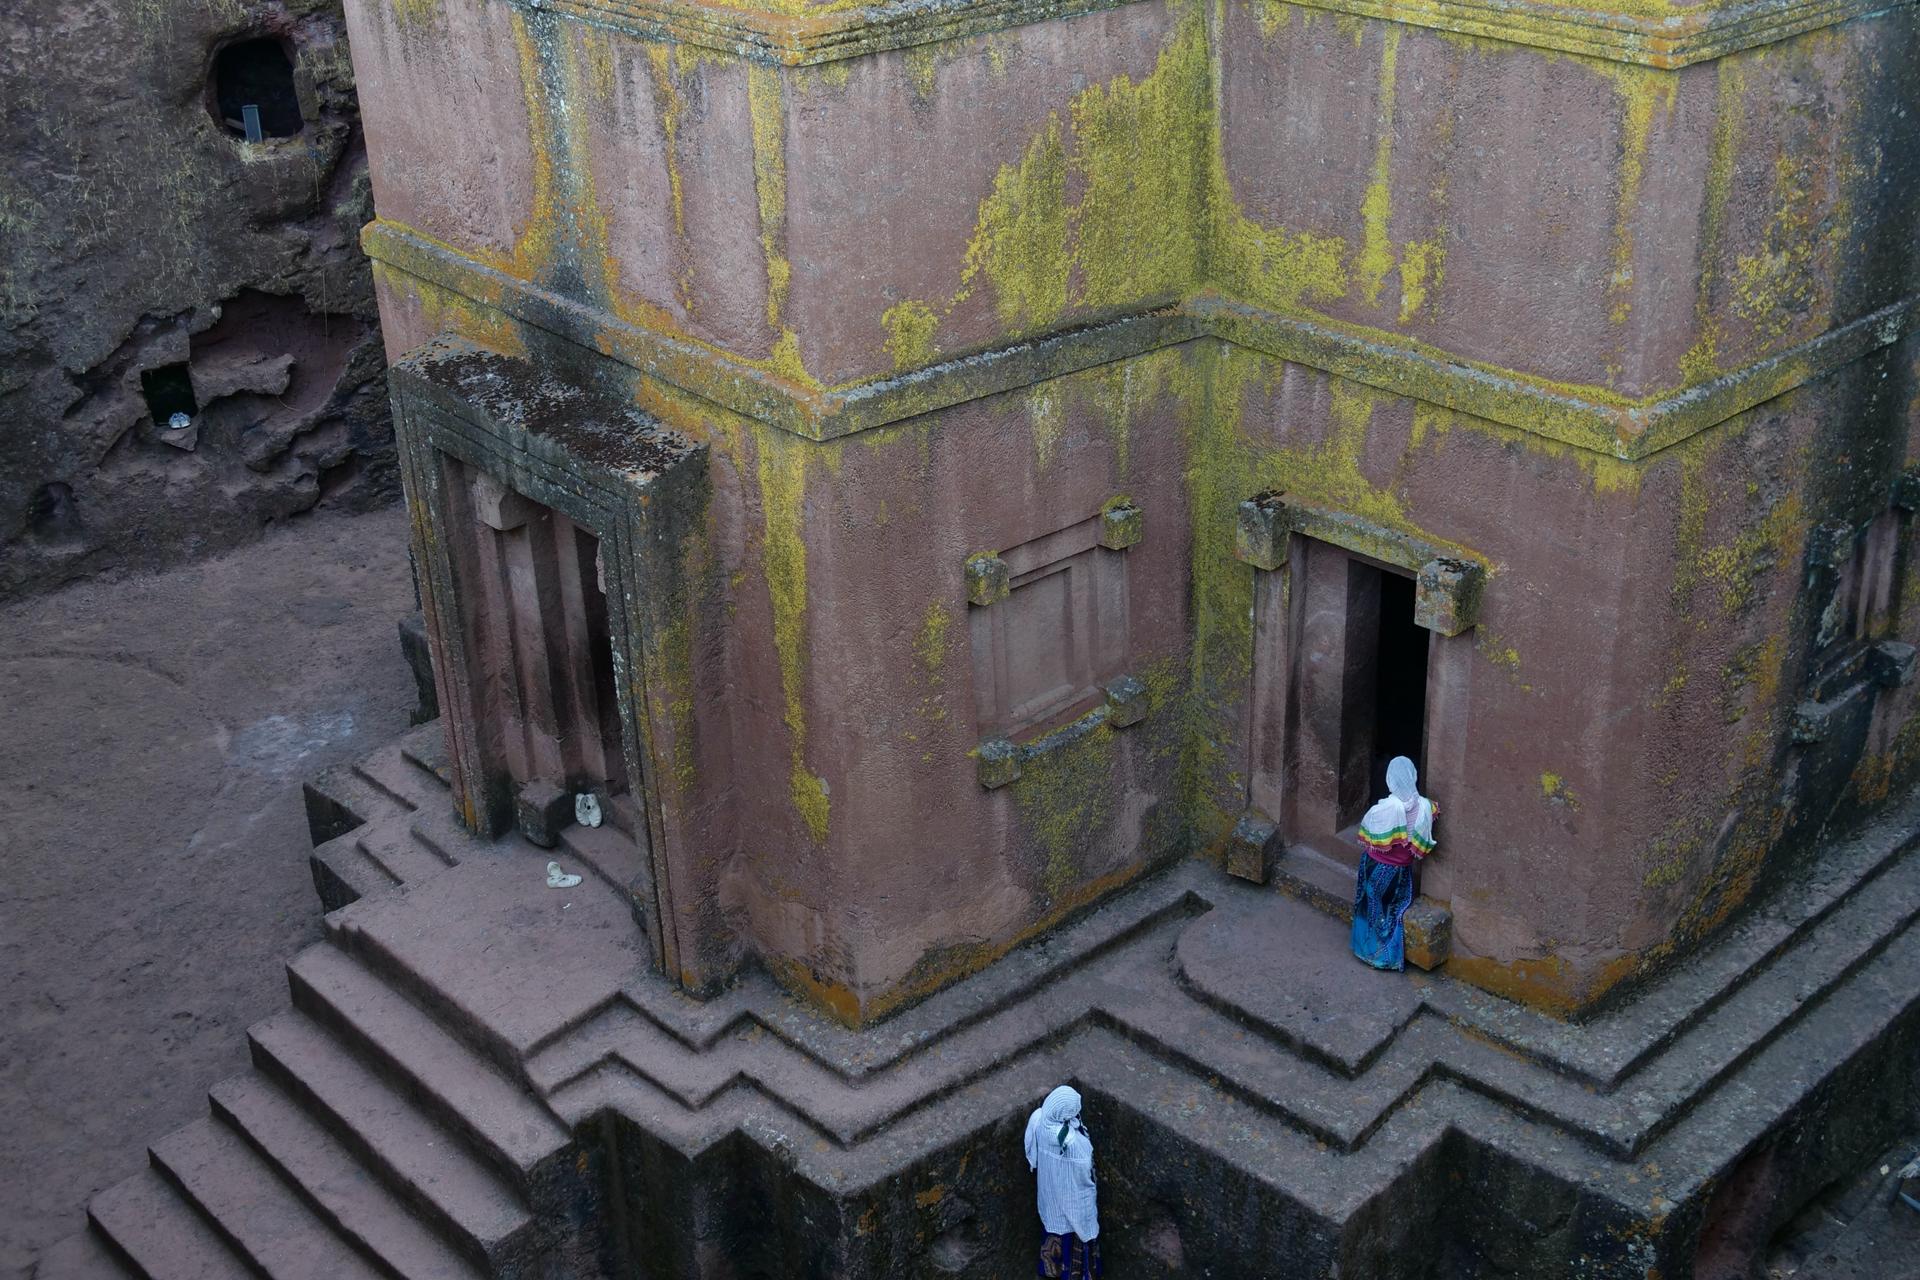 Worshippers at the 13th-century rock-hewn churches of Lalibela, Ethiopia, on Feb. 16, 2022.